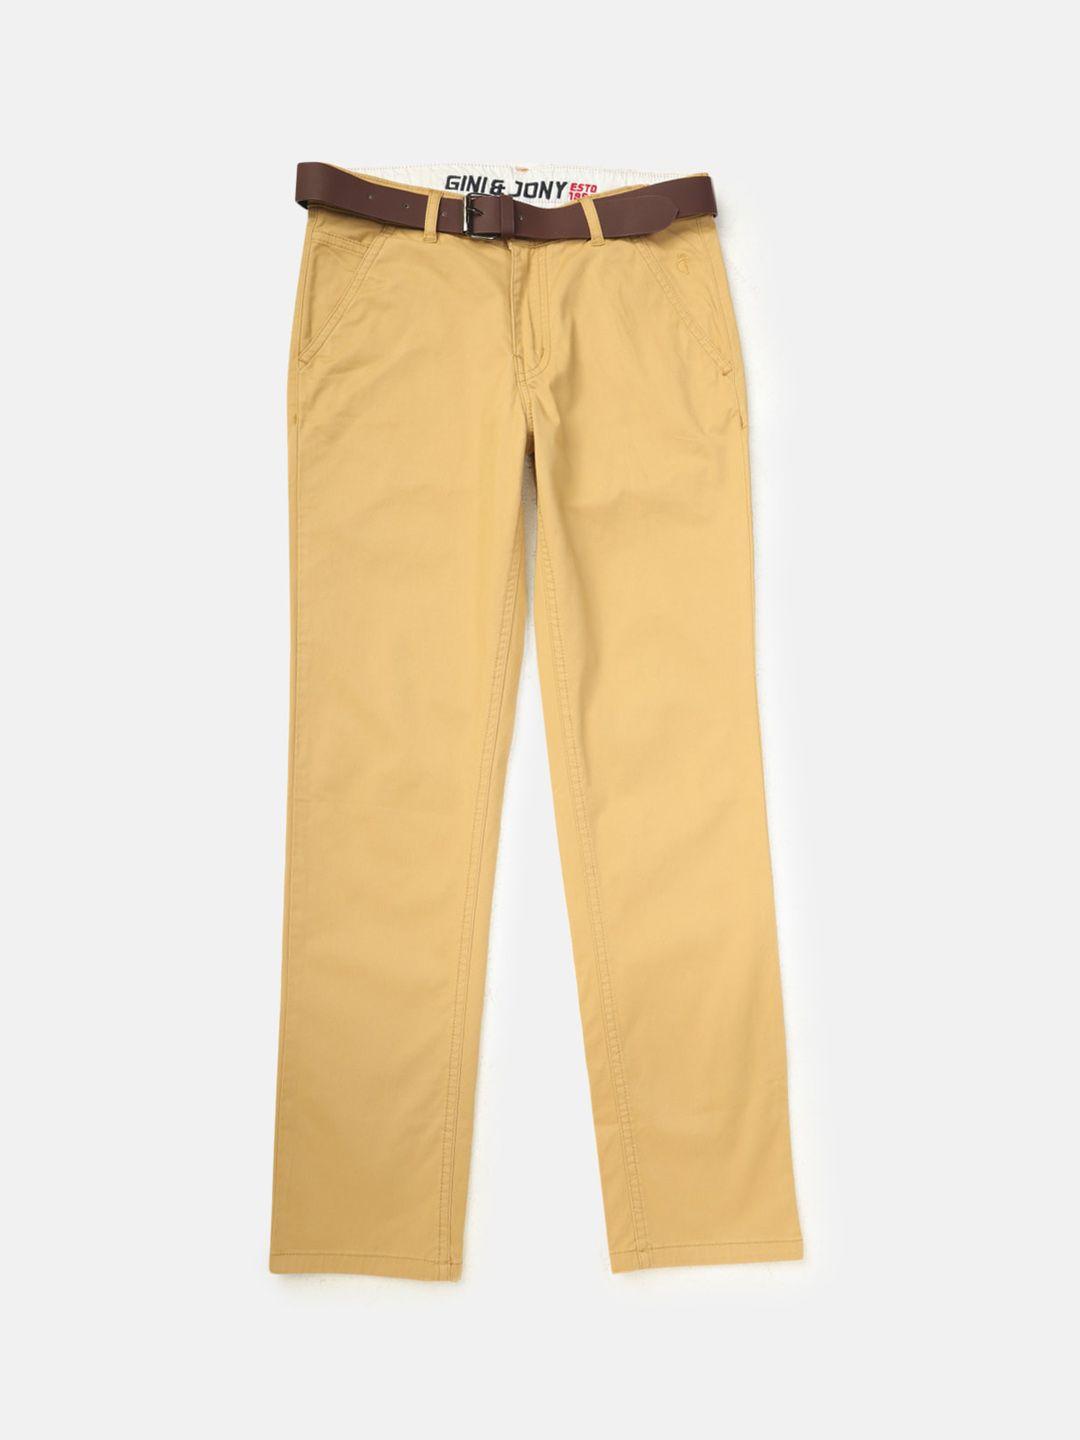 gini-and-jony-boys-cotton-regular-fit-trousers